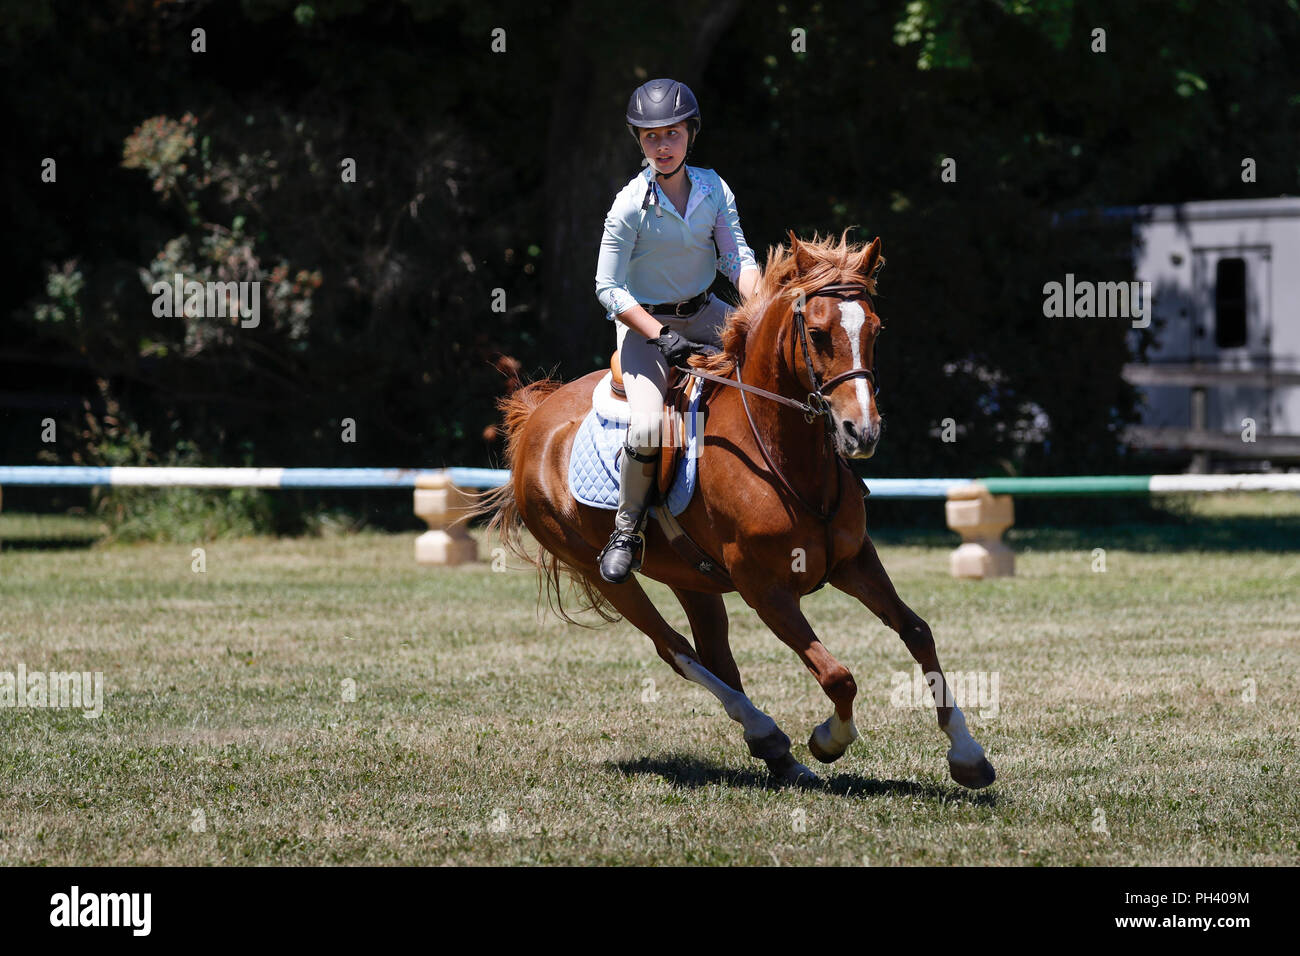 A horse and rider cantering during a horse show. Stock Photo